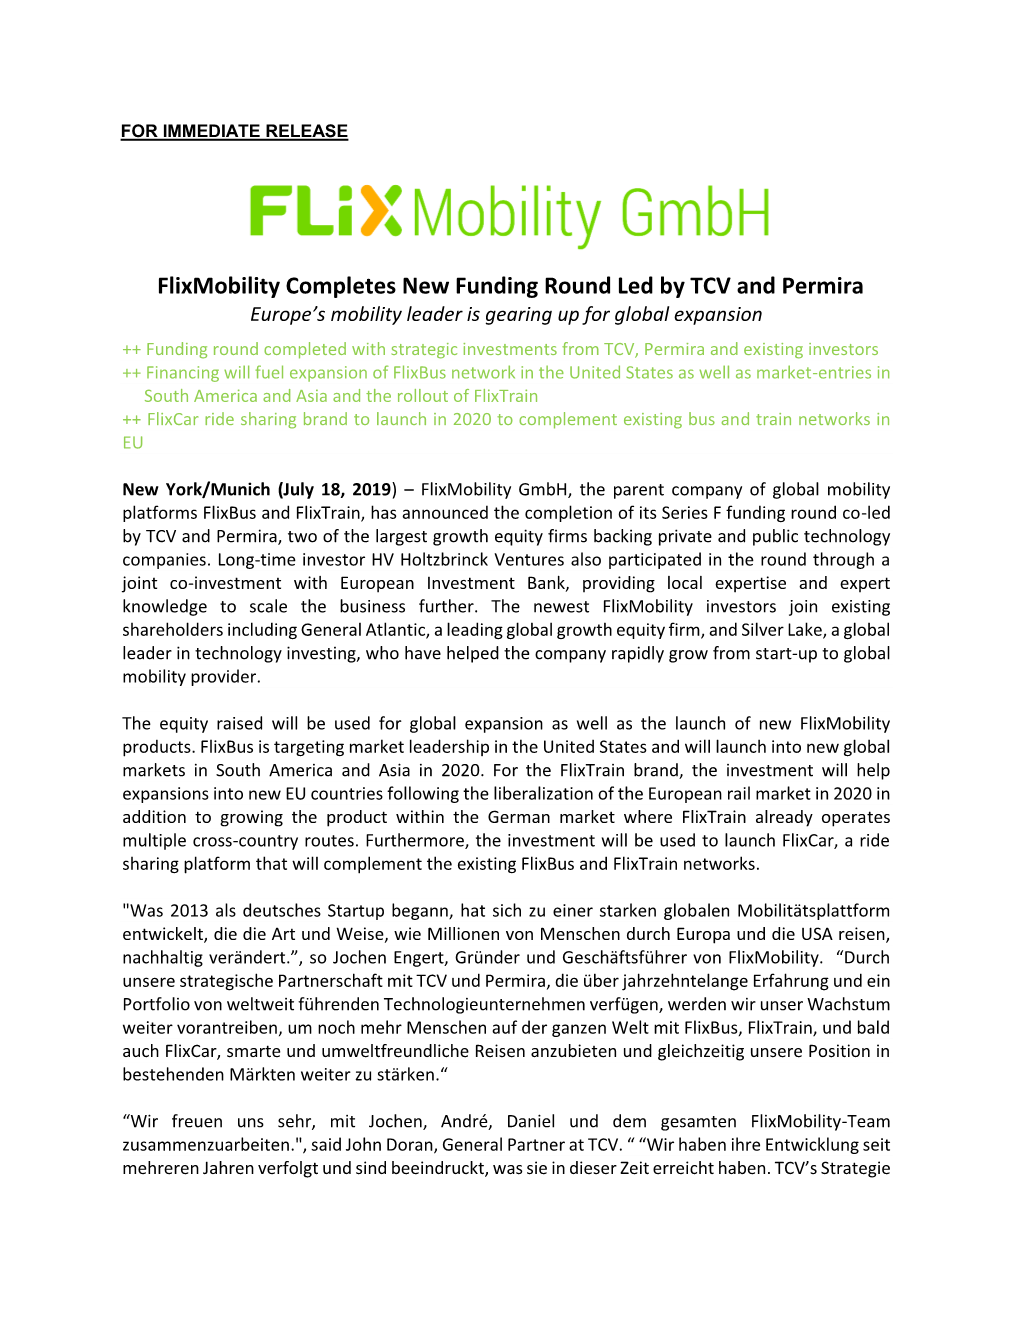 Flixmobility Completes New Funding Round Led by TCV and Permira